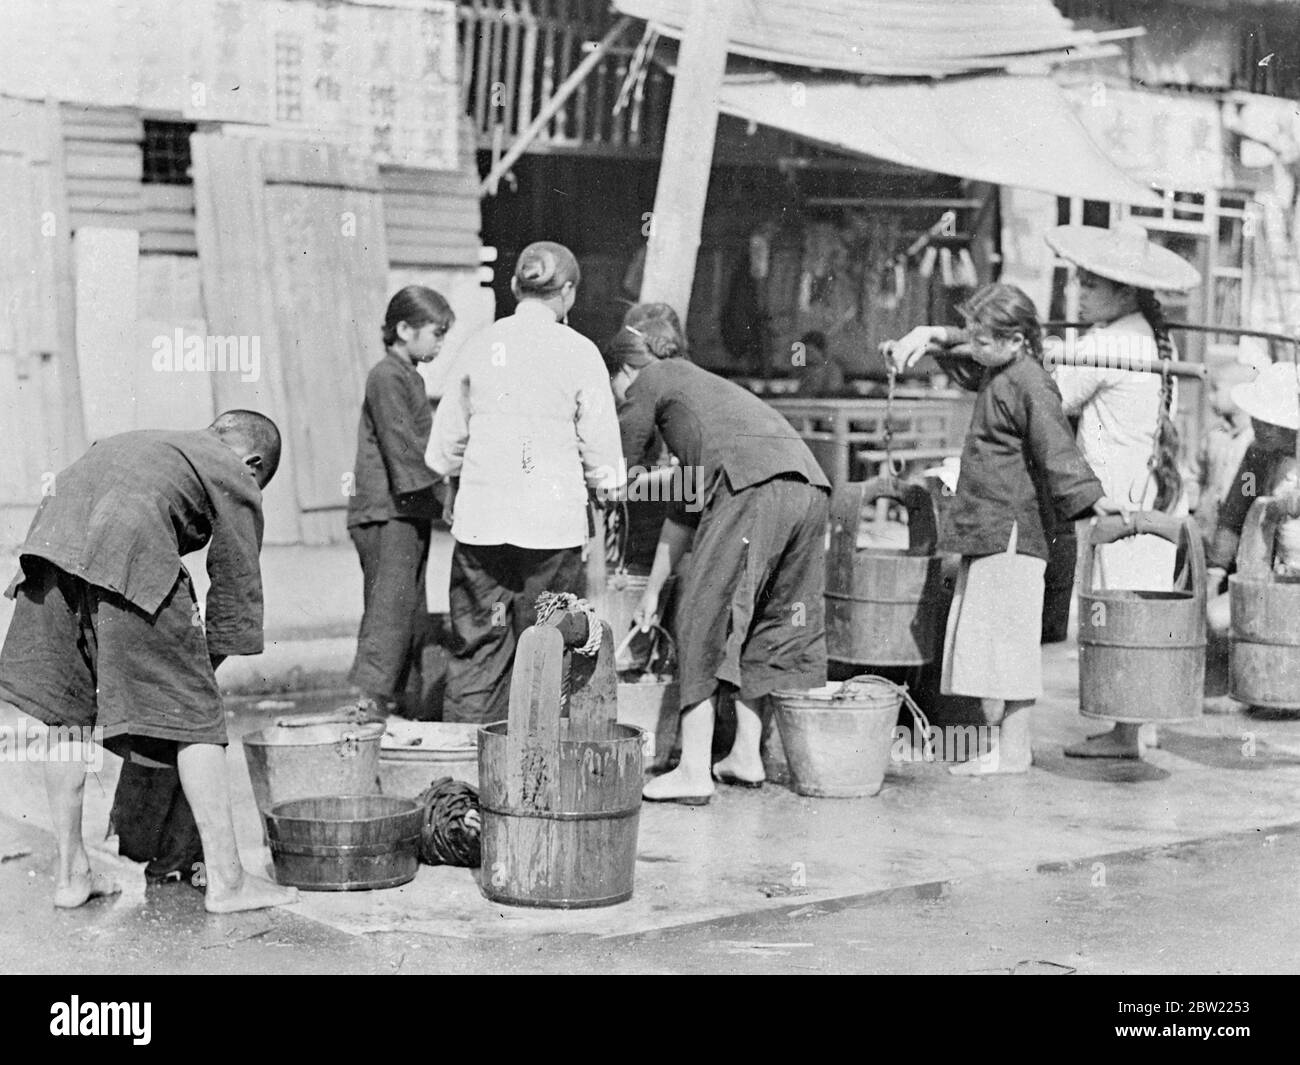 A thousand people are reported dead after a horrific dawn air raid on Canton, South China, by Japanese bombing planes. Many of the bombs fell in the densely populated poorer districts of the city. Women and children drawing water at the public well in a poor district of Shanghai. Fresh drinking water is scarce and many people are now leaving by walking water through the streets. 23 September 1937 Stock Photo